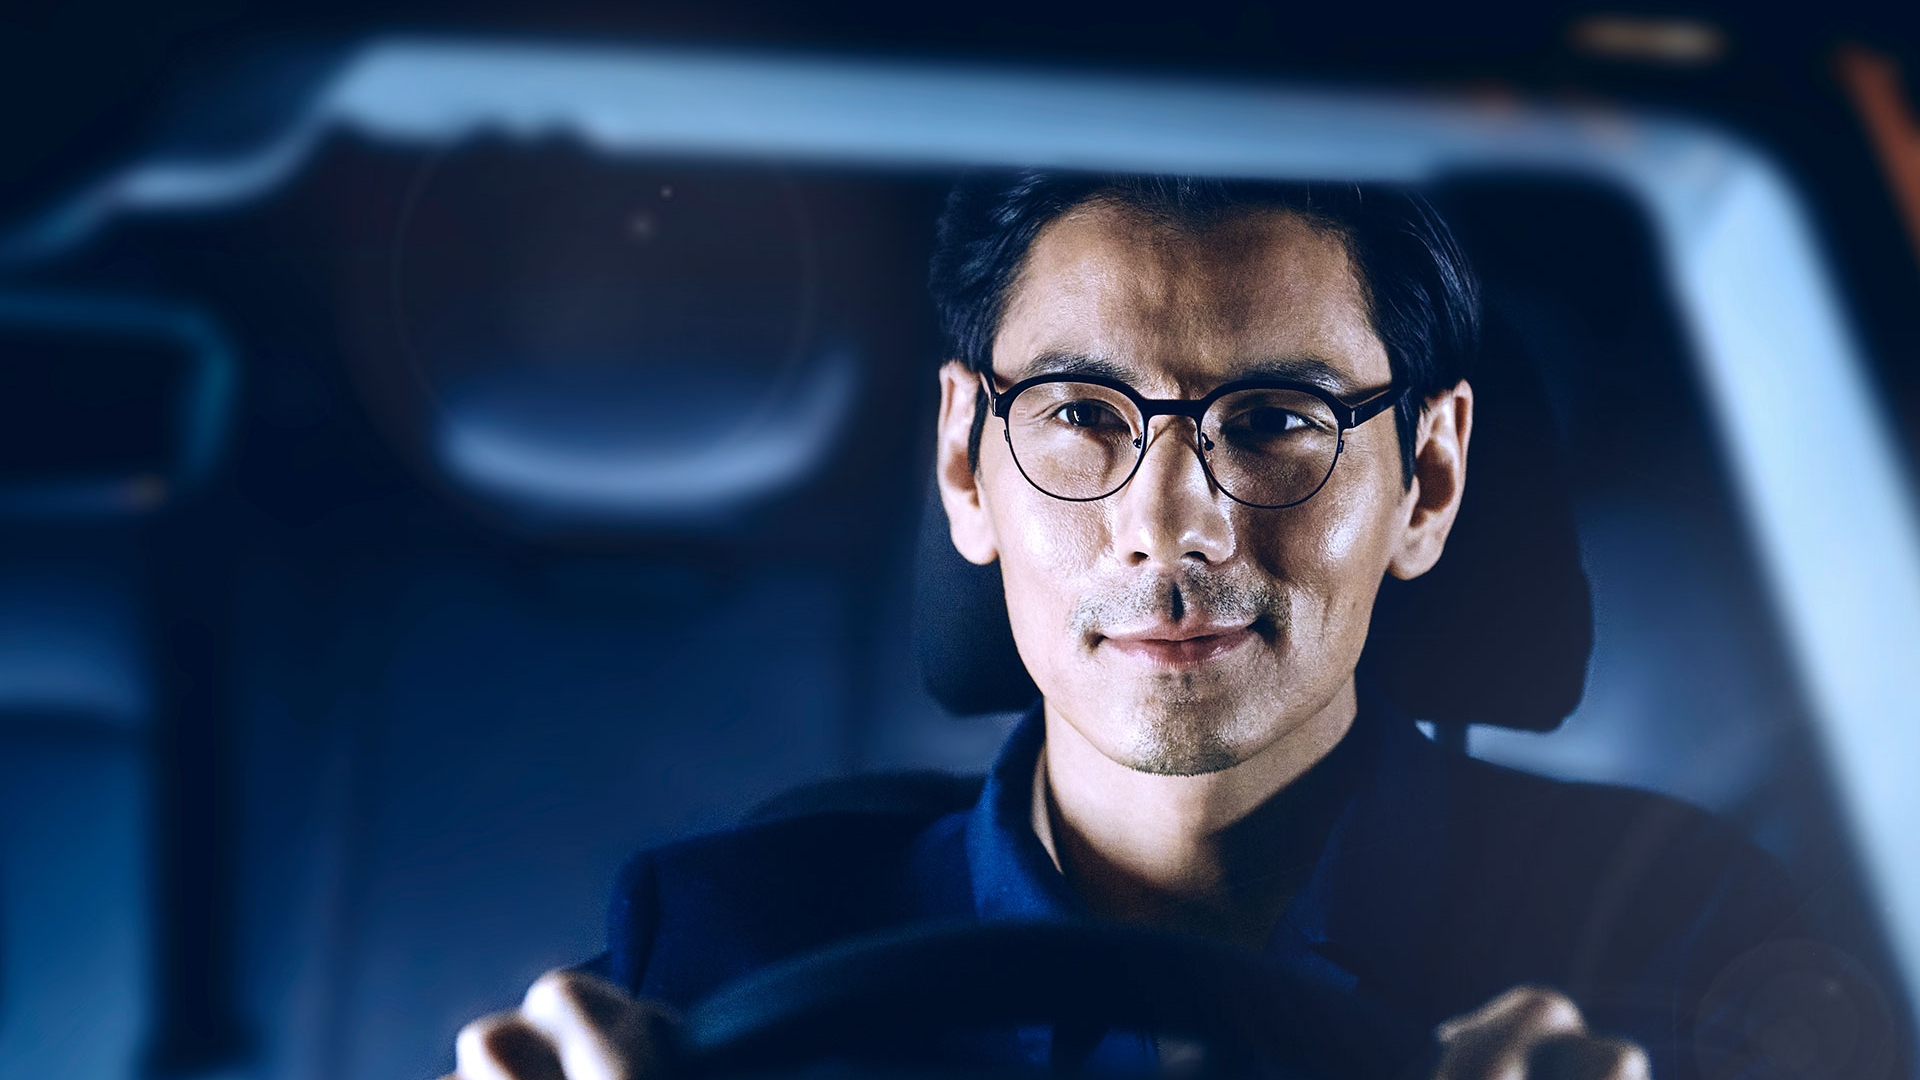 The lenses for more relaxed driving